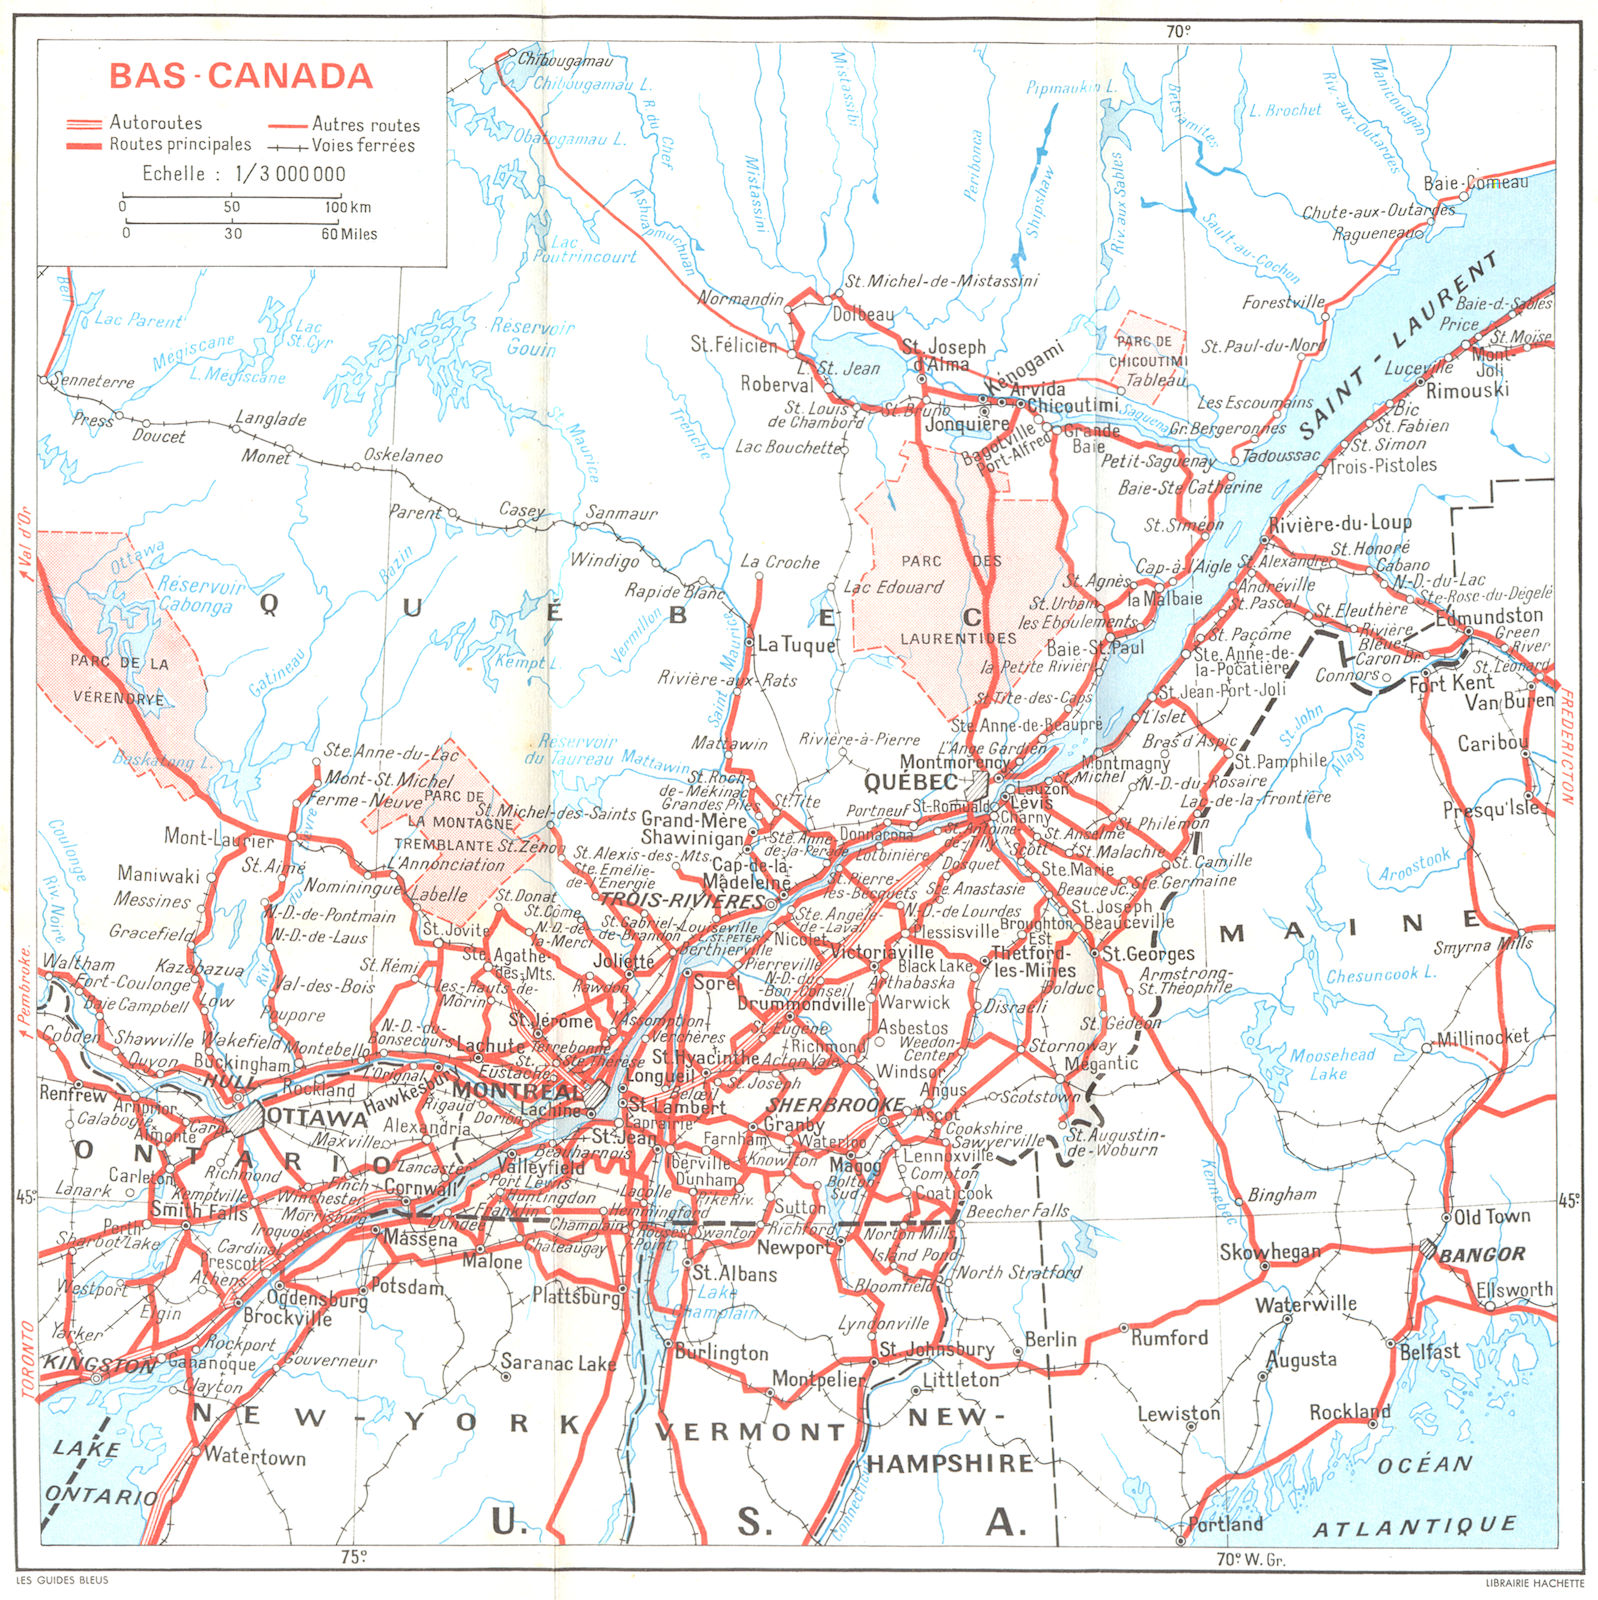 CANADA. Bas  1967 old vintage map plan chart